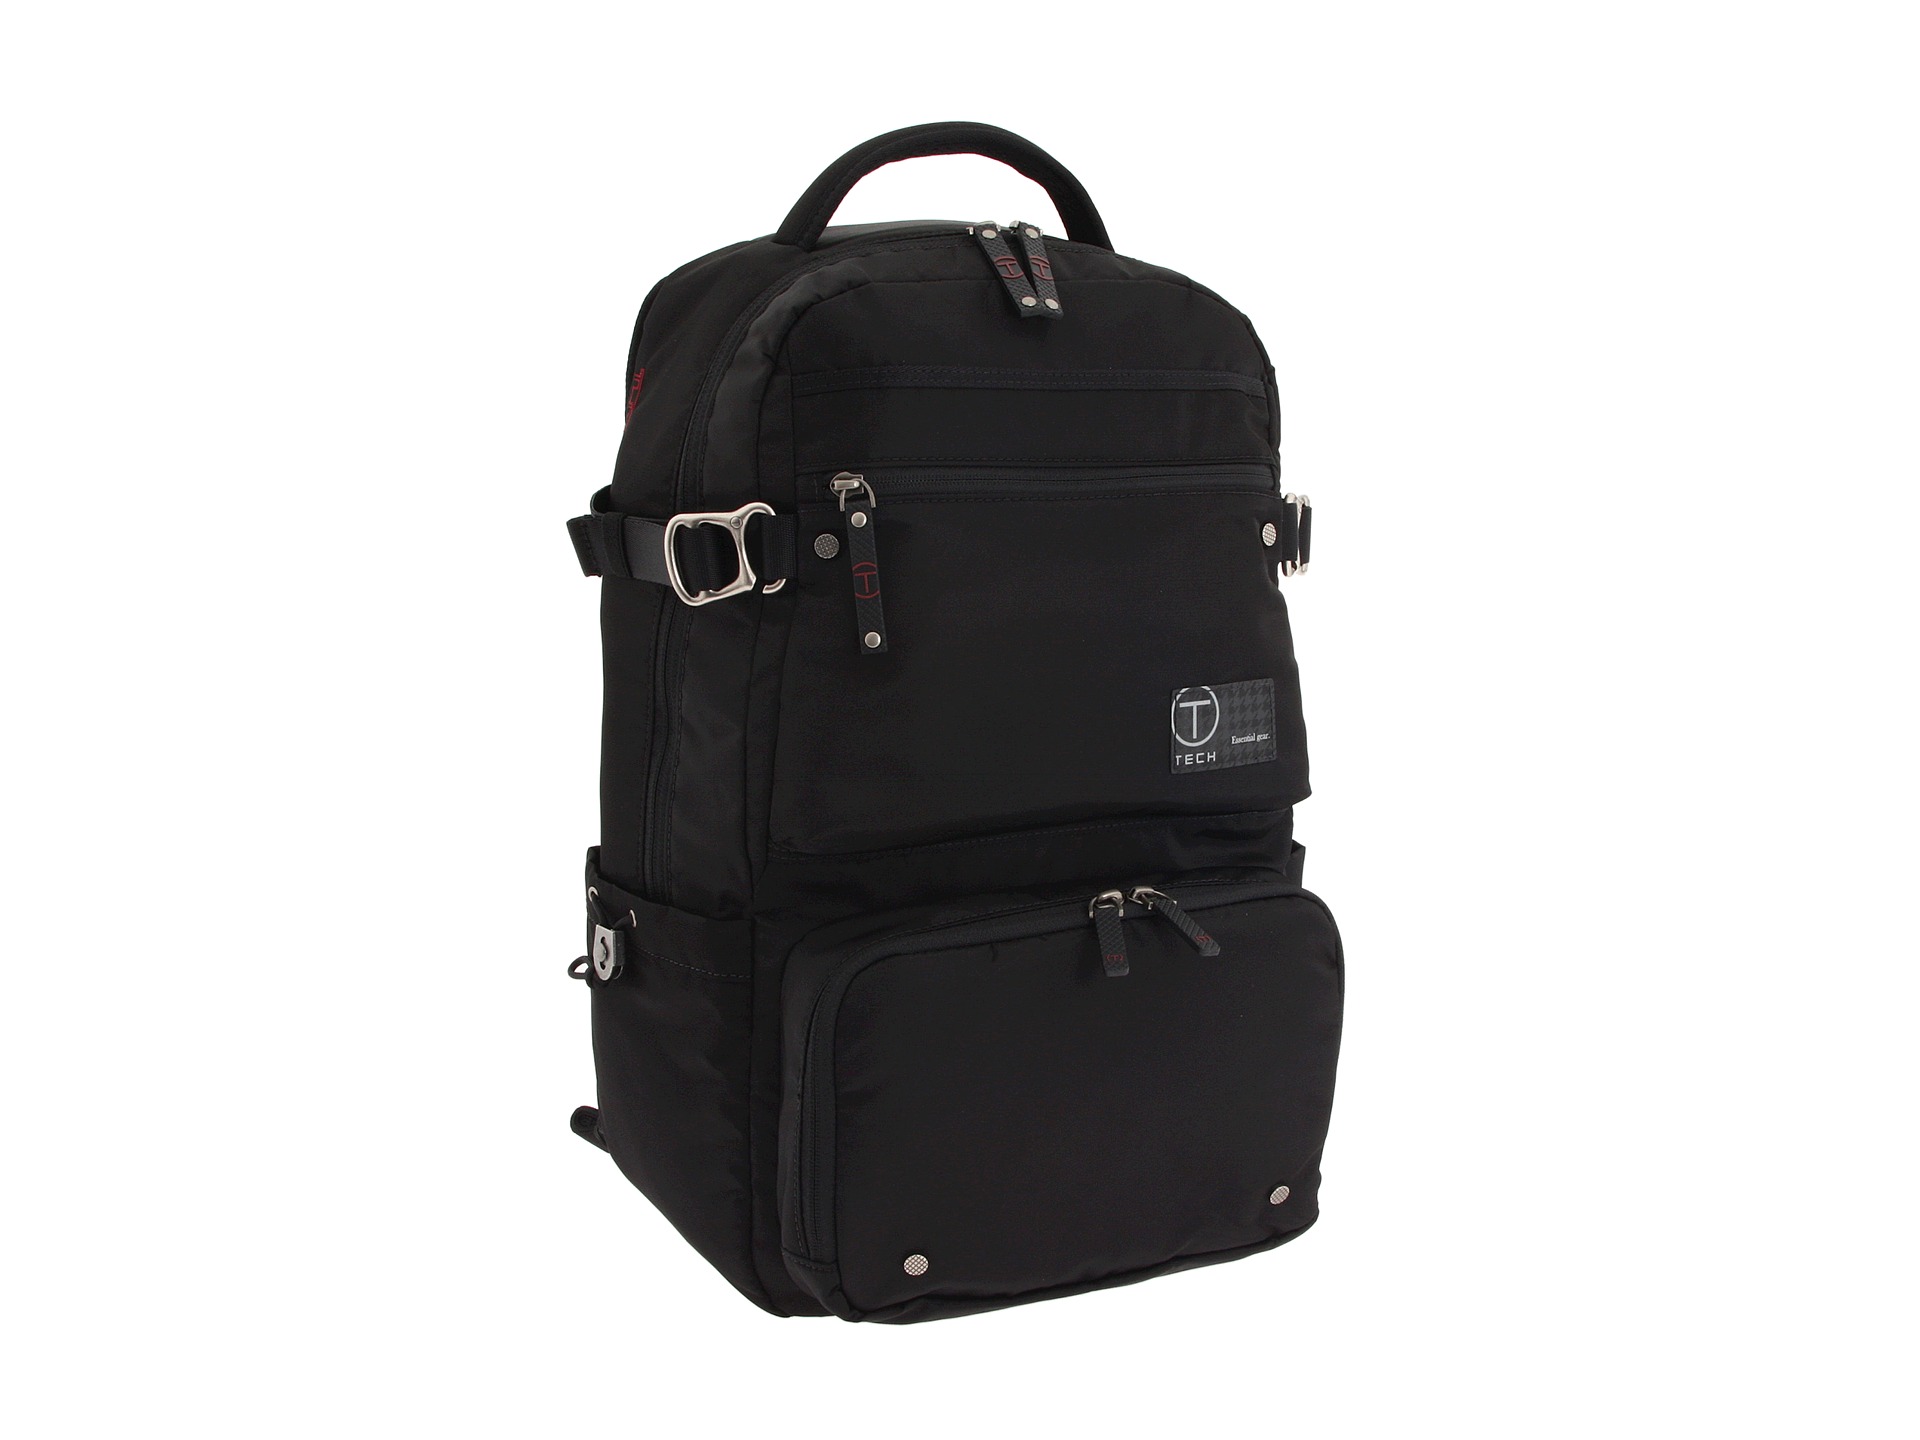 tumi t tech icon melville zip top backpack $ 195